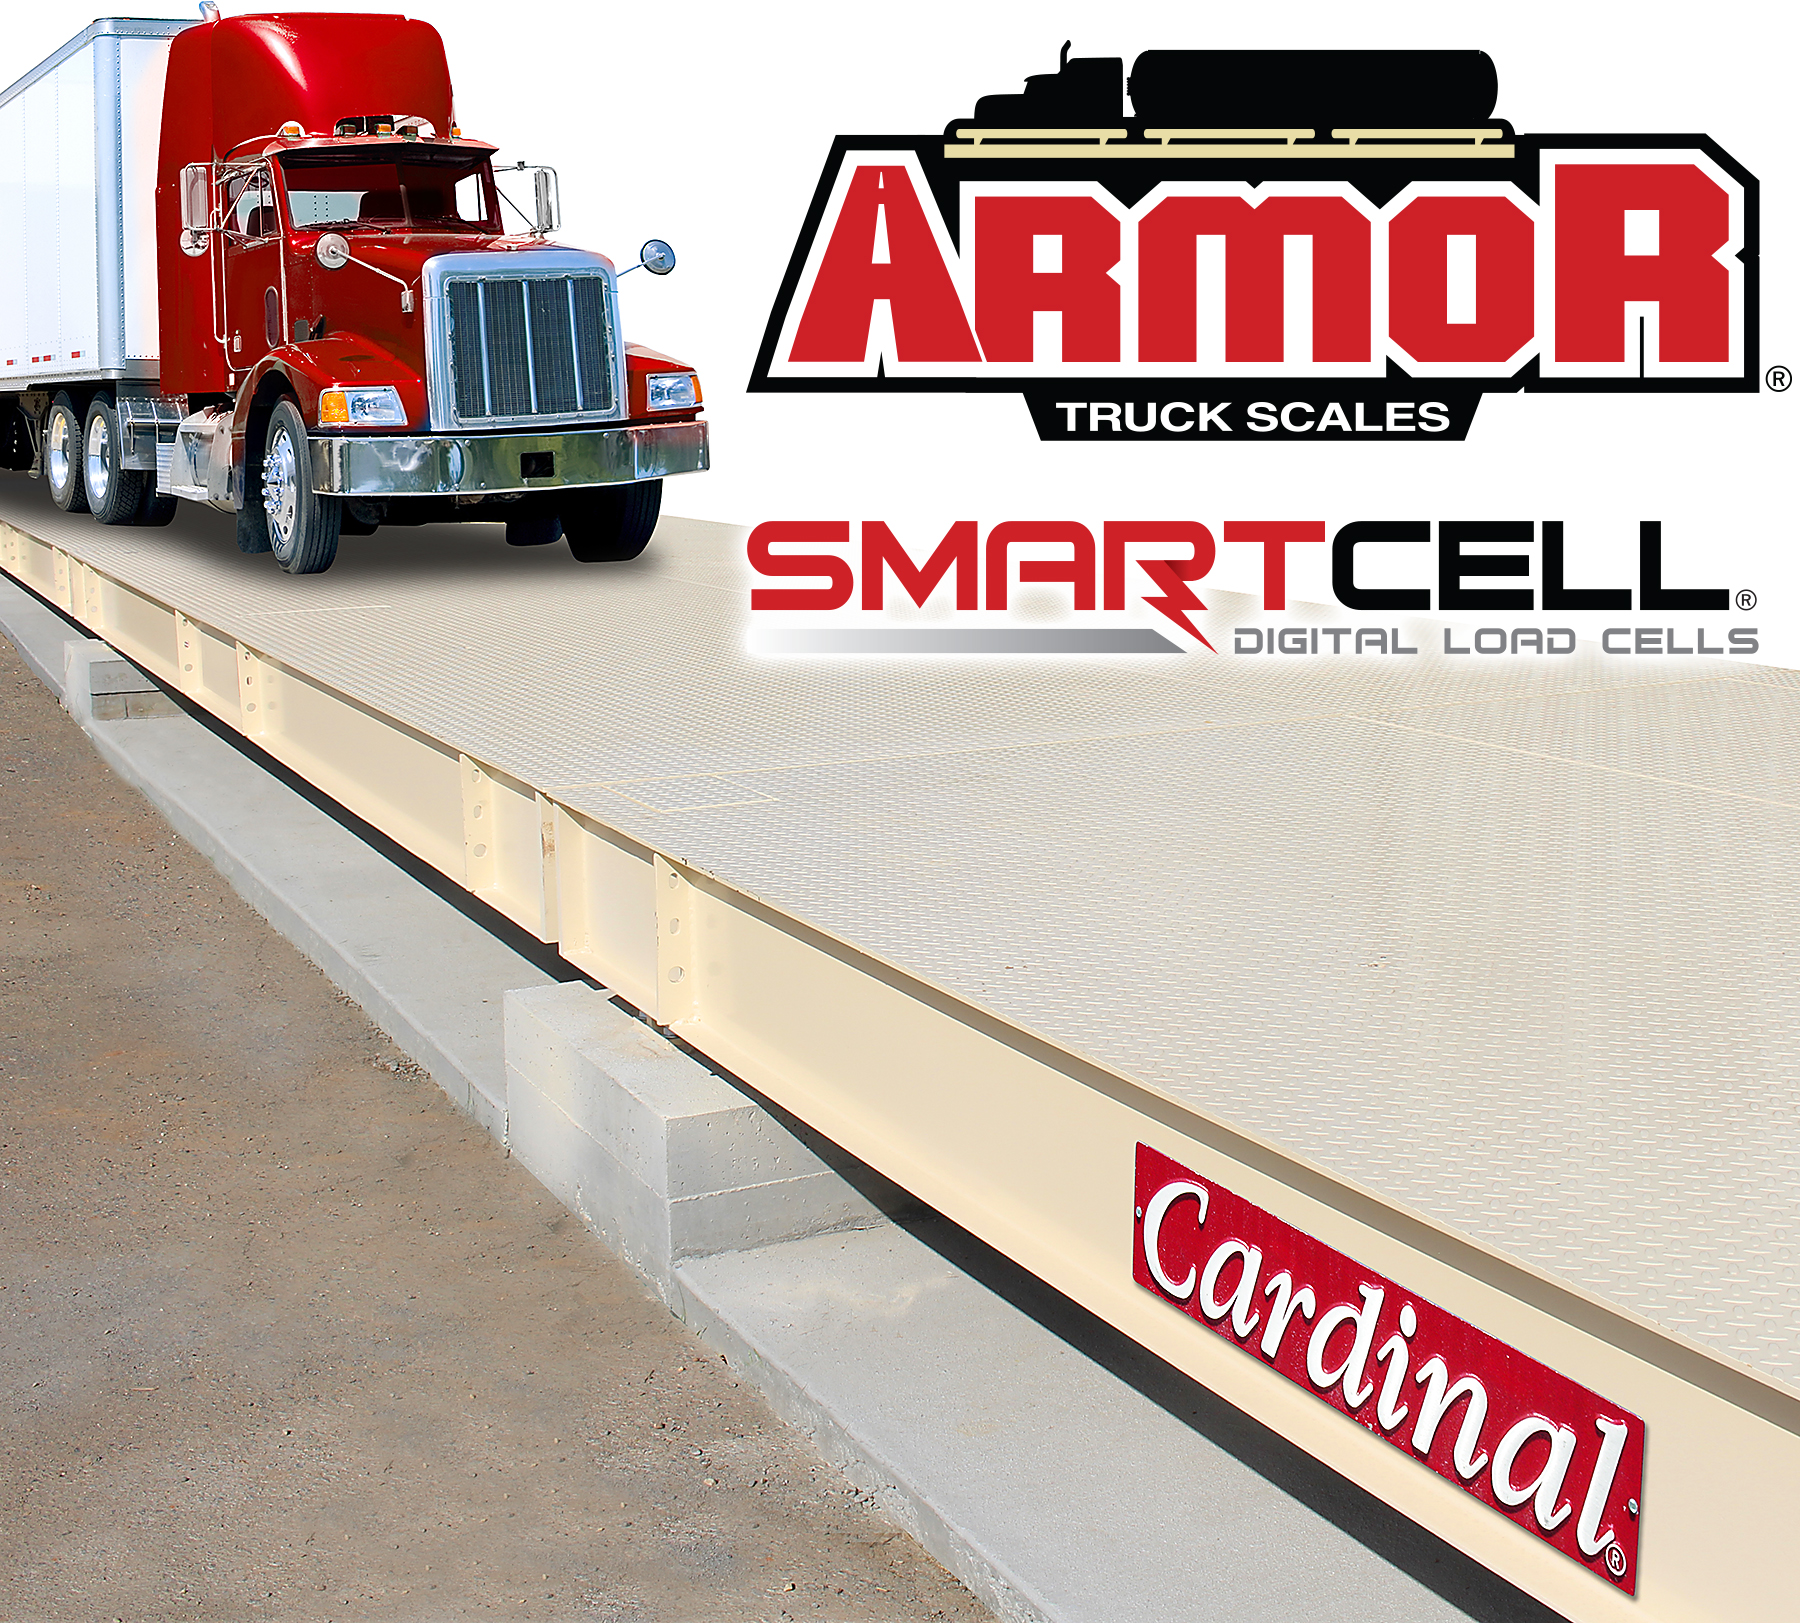 Cardinal’s New ARMOR Truck Scales with Digital SmartCells